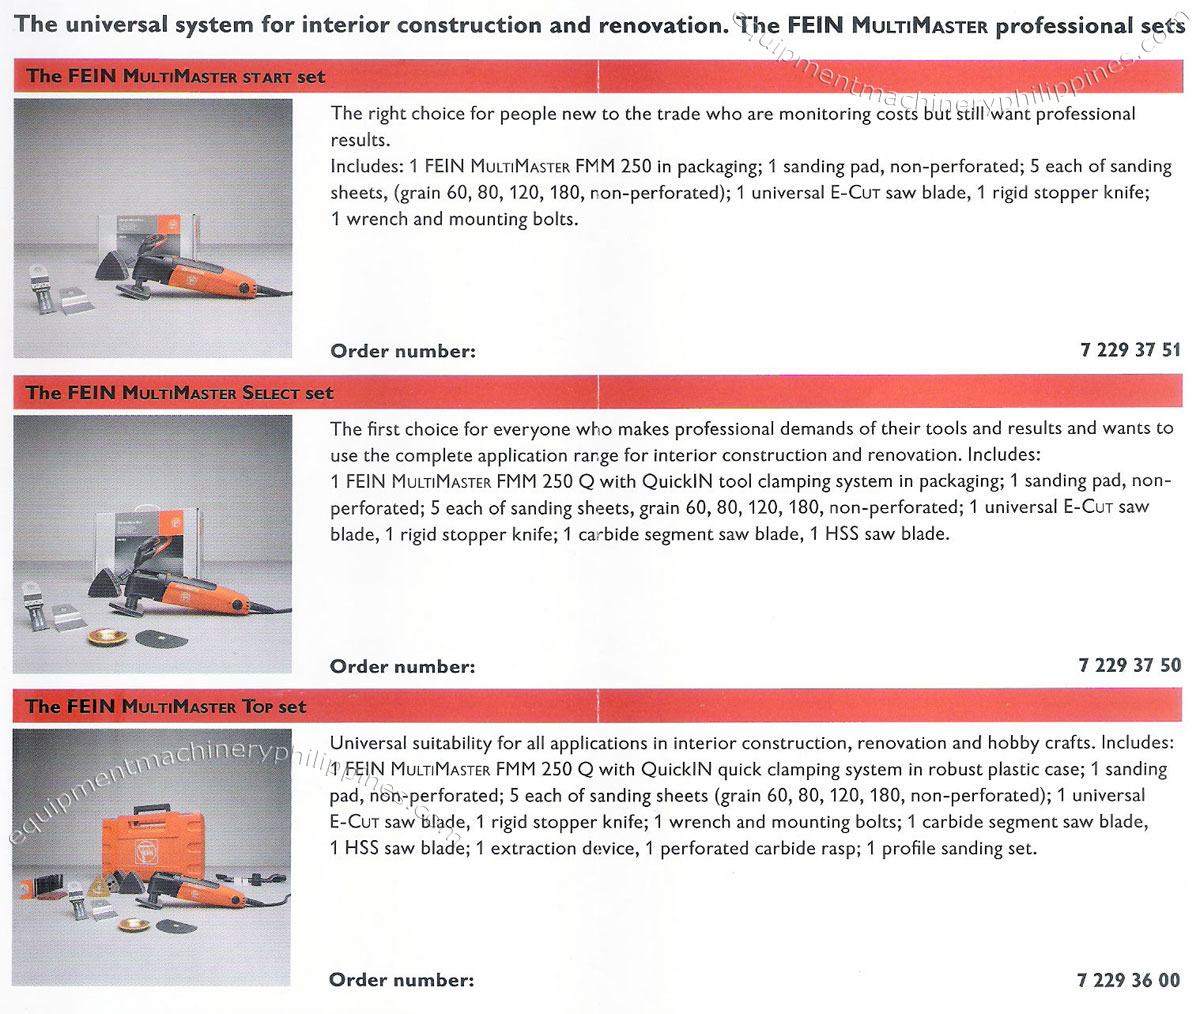 The Universal System for Interior Construction and Renovation The FEIN MultiMaster Professional Sets